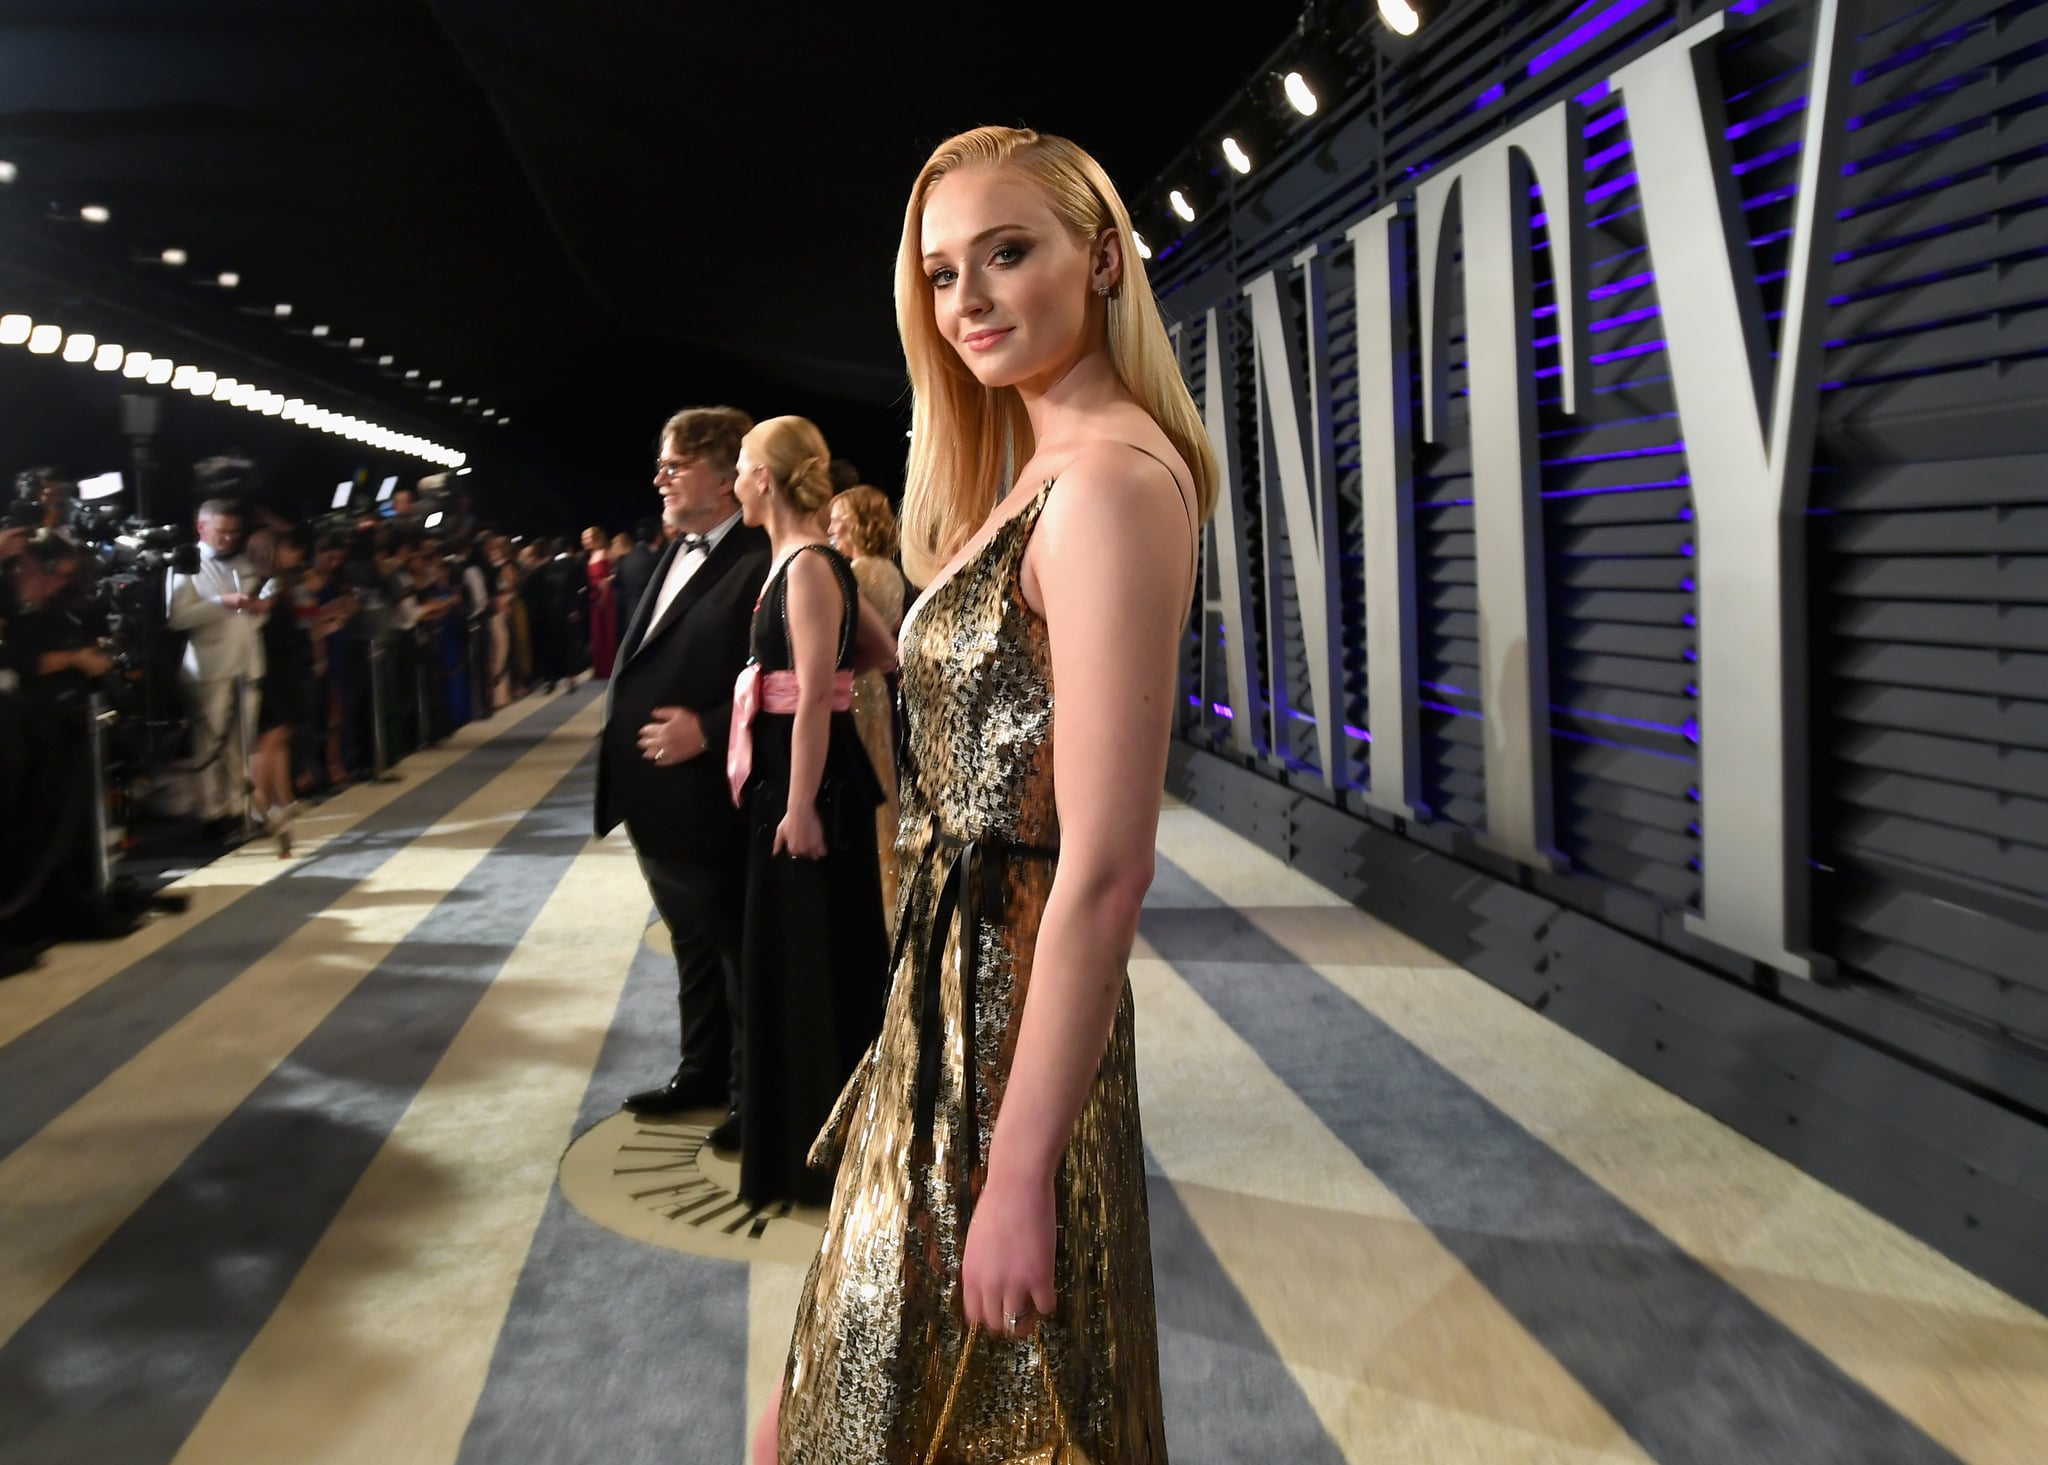 BEVERLY HILLS, CA - FEBRUARY 24:  Sophie Turner attends the 2019 Vanity Fair Oscar Party hosted by Radhika Jones at Wallis Annenberg Center for the Performing Arts on February 24, 2019 in Beverly Hills, California.  (Photo by Mike Coppola/VF19/Getty Images for VF)